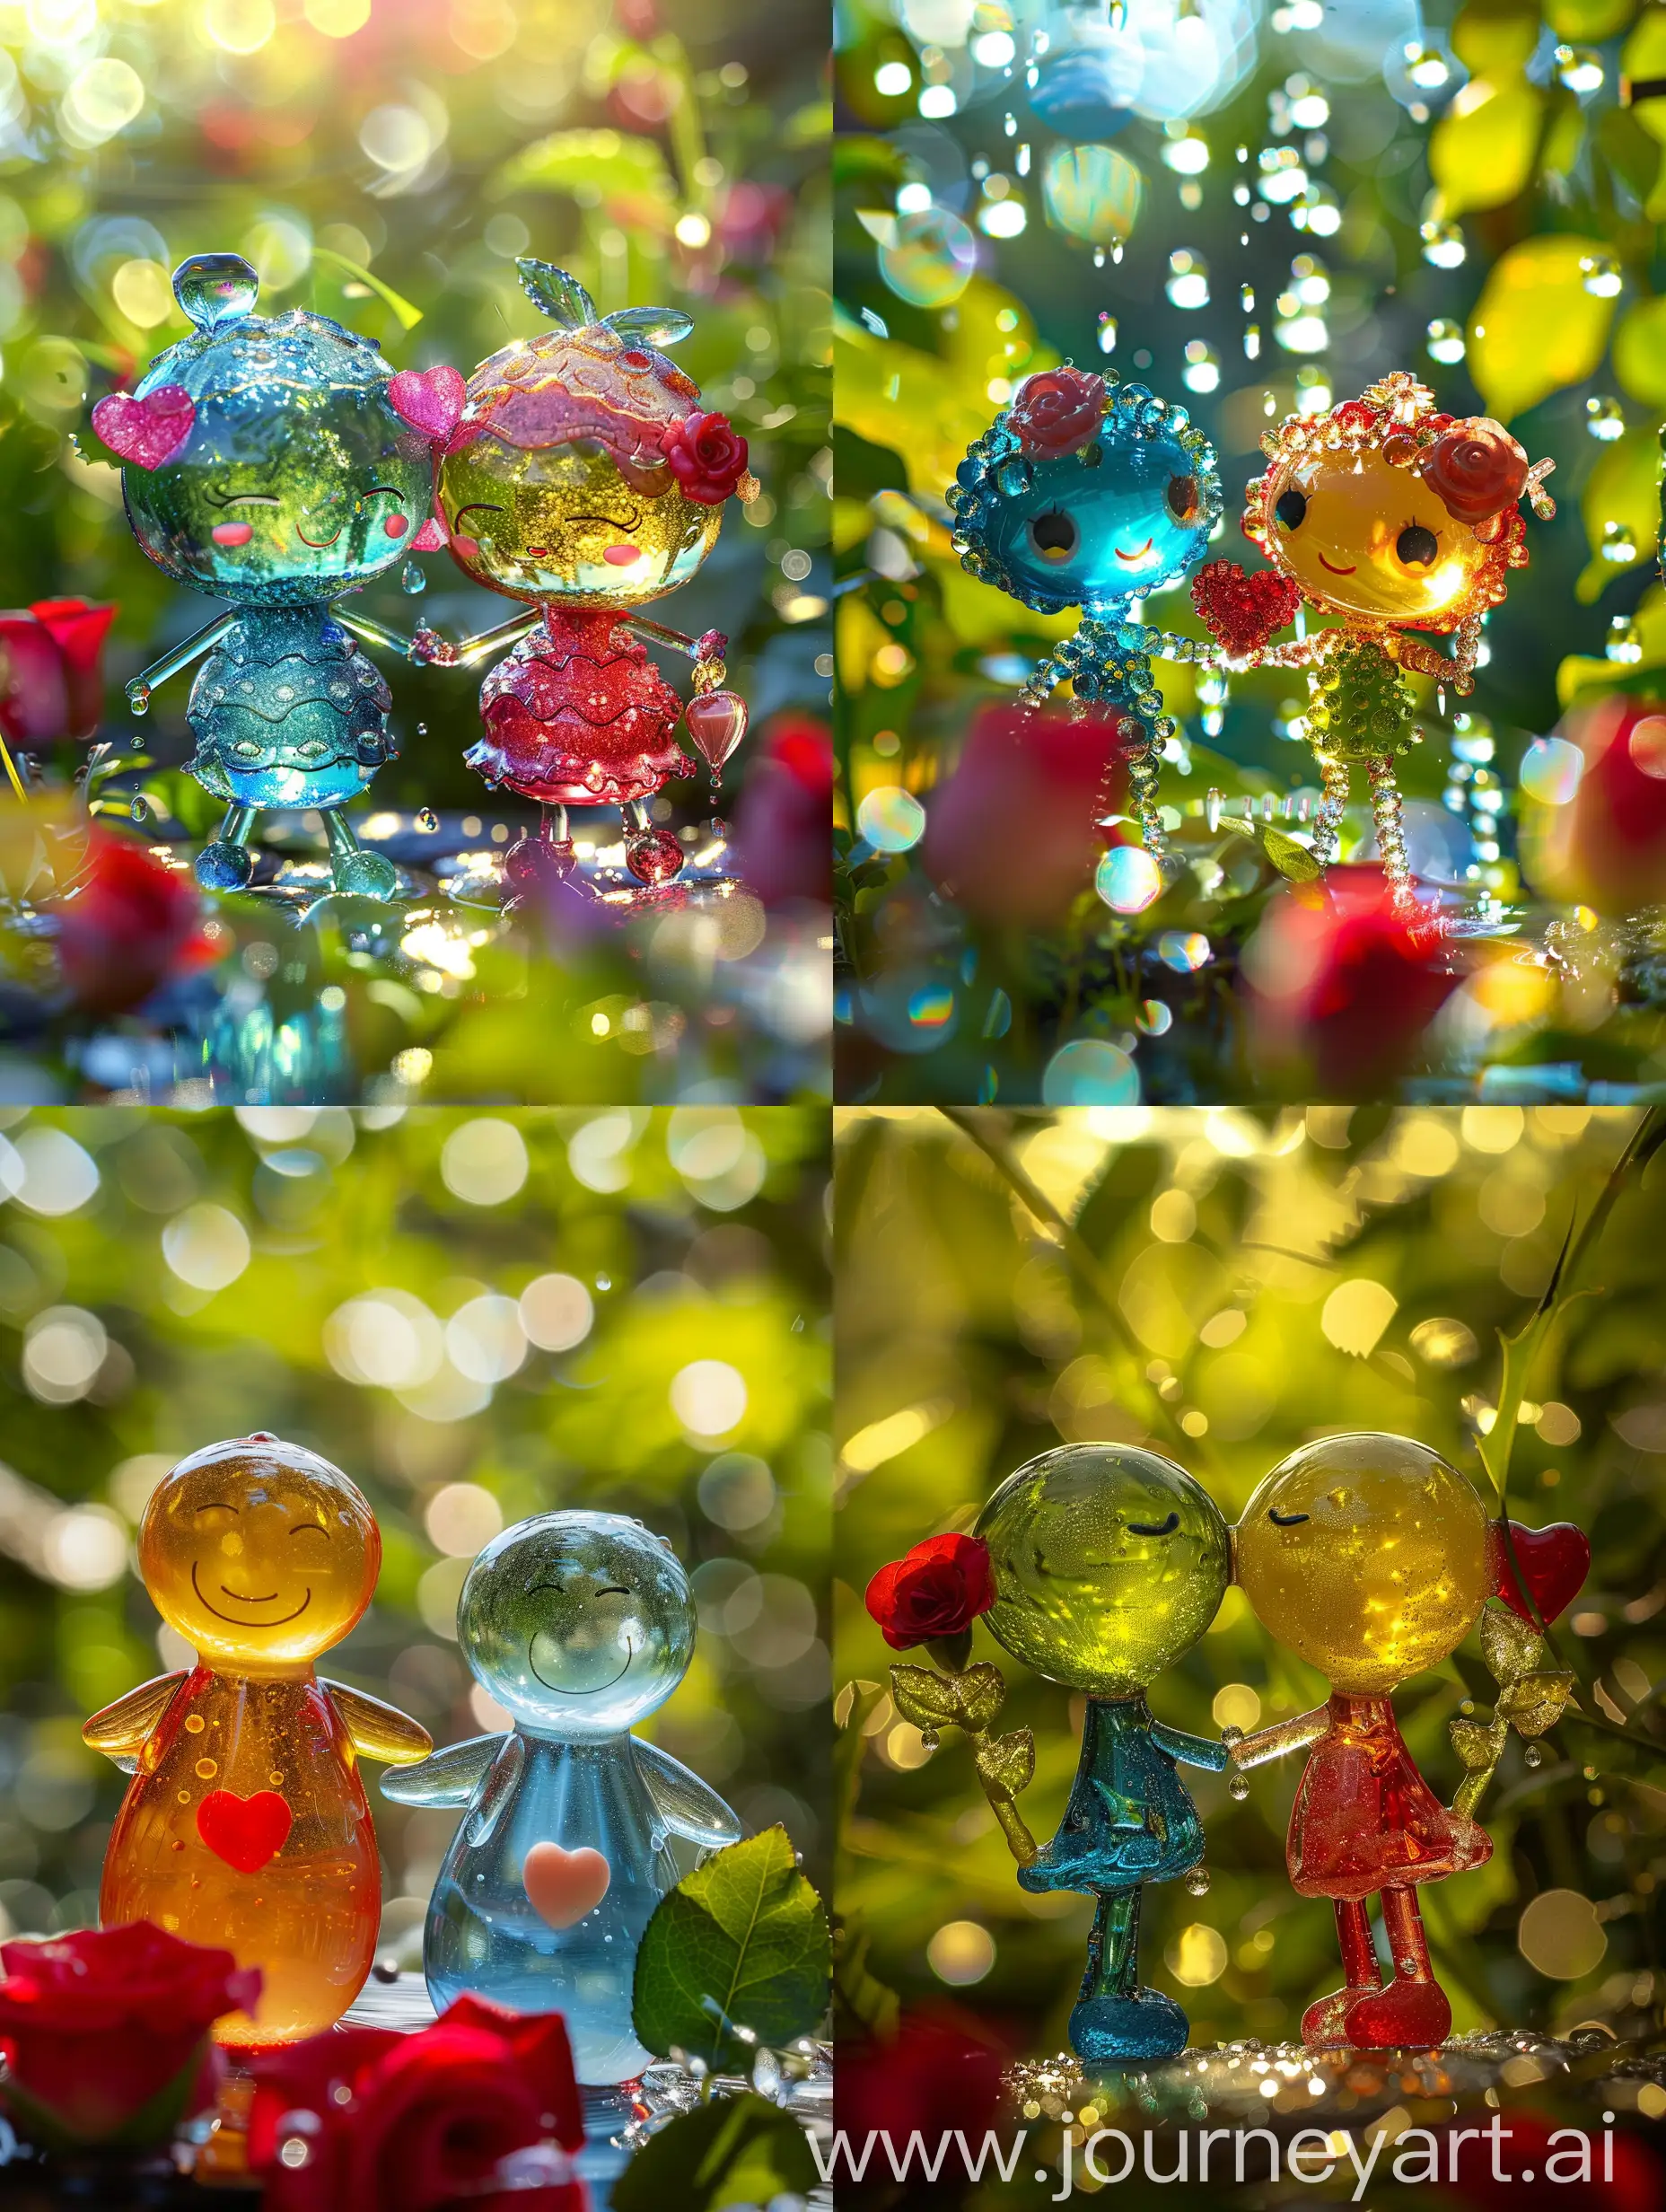 create two colourful crystall glass charecter of joyfull doll, cute face, they holding hand each other, lush garden with sparkling water droplets, red rose and heart shape background